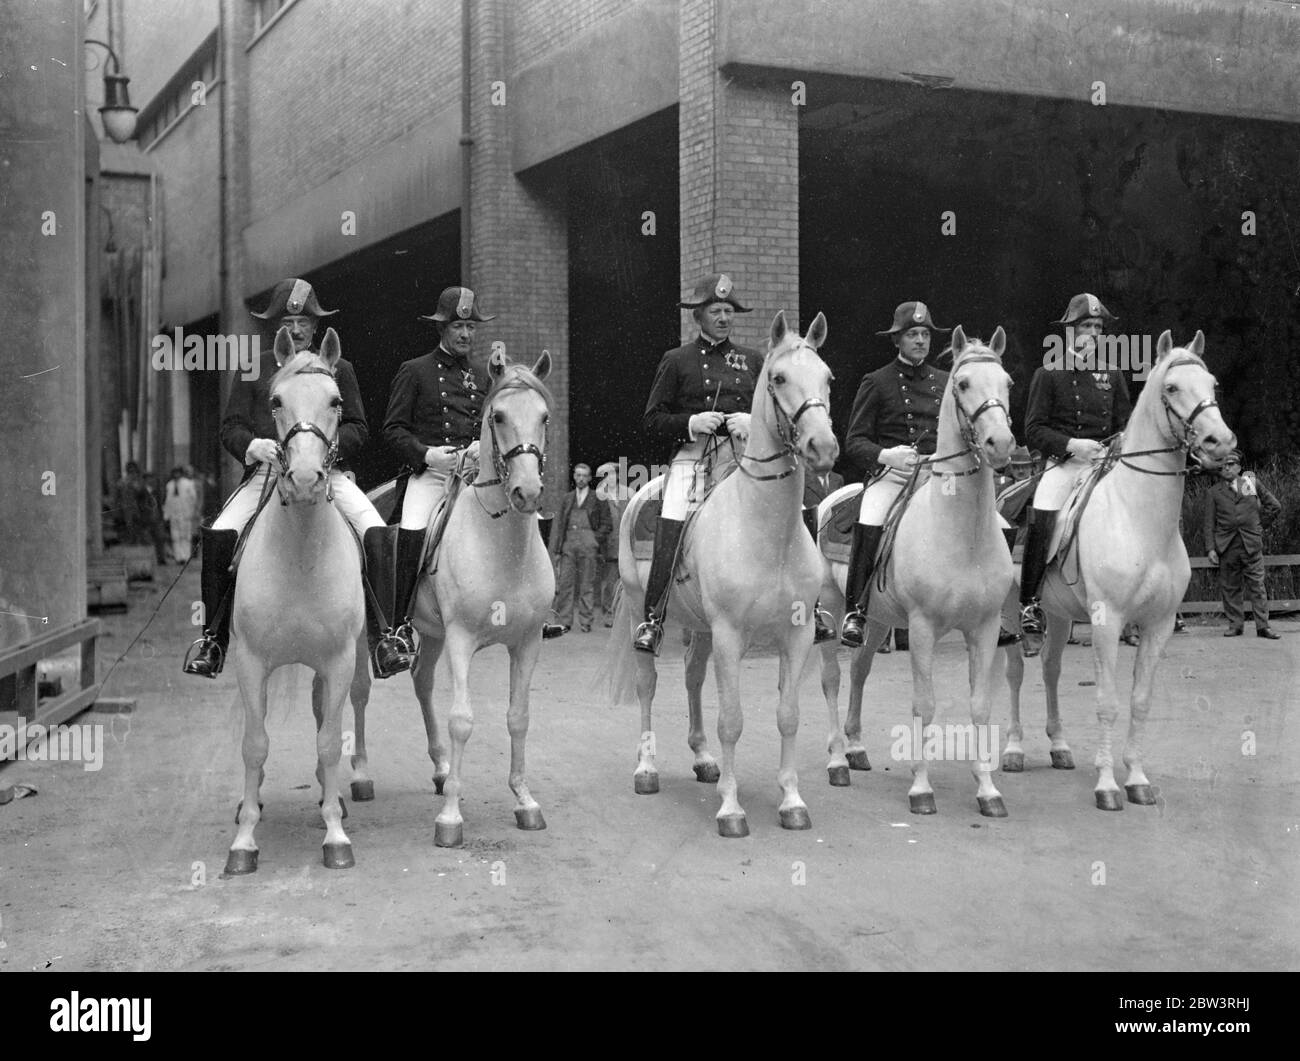 Riders from famous Vienna school rehearse at Olympia for International horse show . Riders of the historic Imperial Riding School in Vienna rehearsed the equine ballet at Olympia , London in readiness for the International Horse Show opening May 30 . Photo shows , the Austrian riders in their picturesque uniforms at Olympia . 28 May 1936 Stock Photo